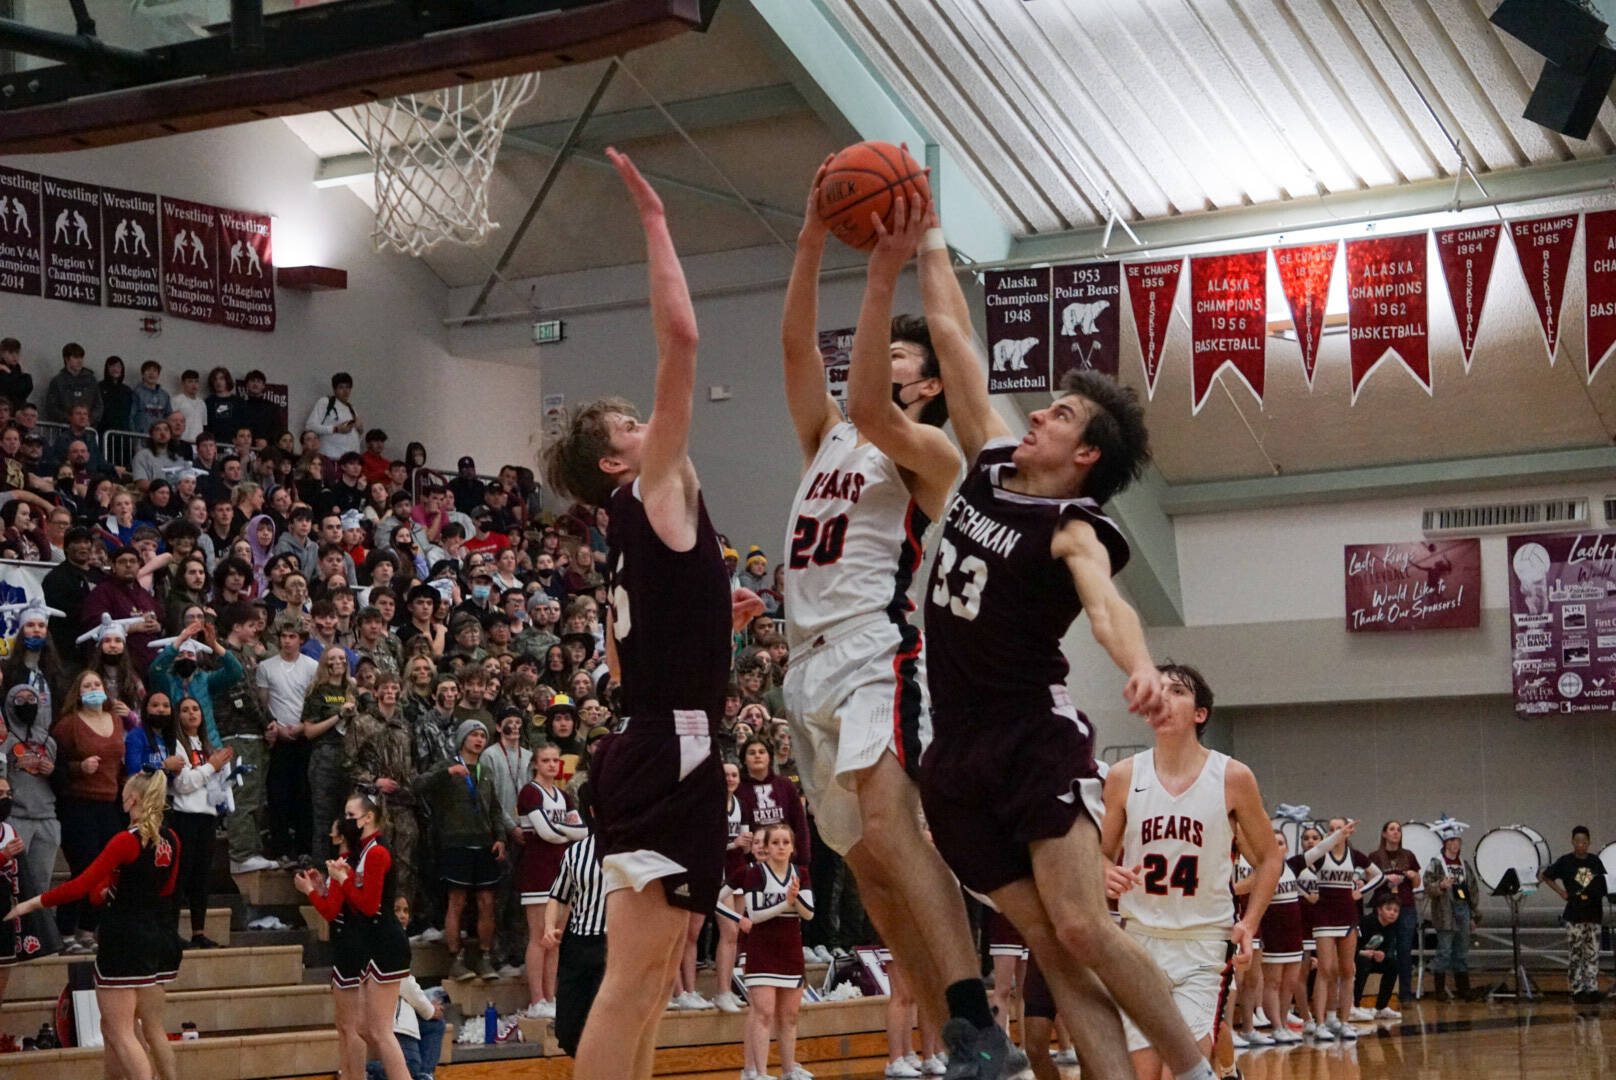 JDHS’ Orion Dybdahl (20), a junior, rises for a shot in the Region V 4A Tournament championship game against Ketchikan High School. A buzzer-beater by Dybdahl secured the Crimson Bears and tournament win and state tournament berth. (Courtesy Photo / Jeff Lund)